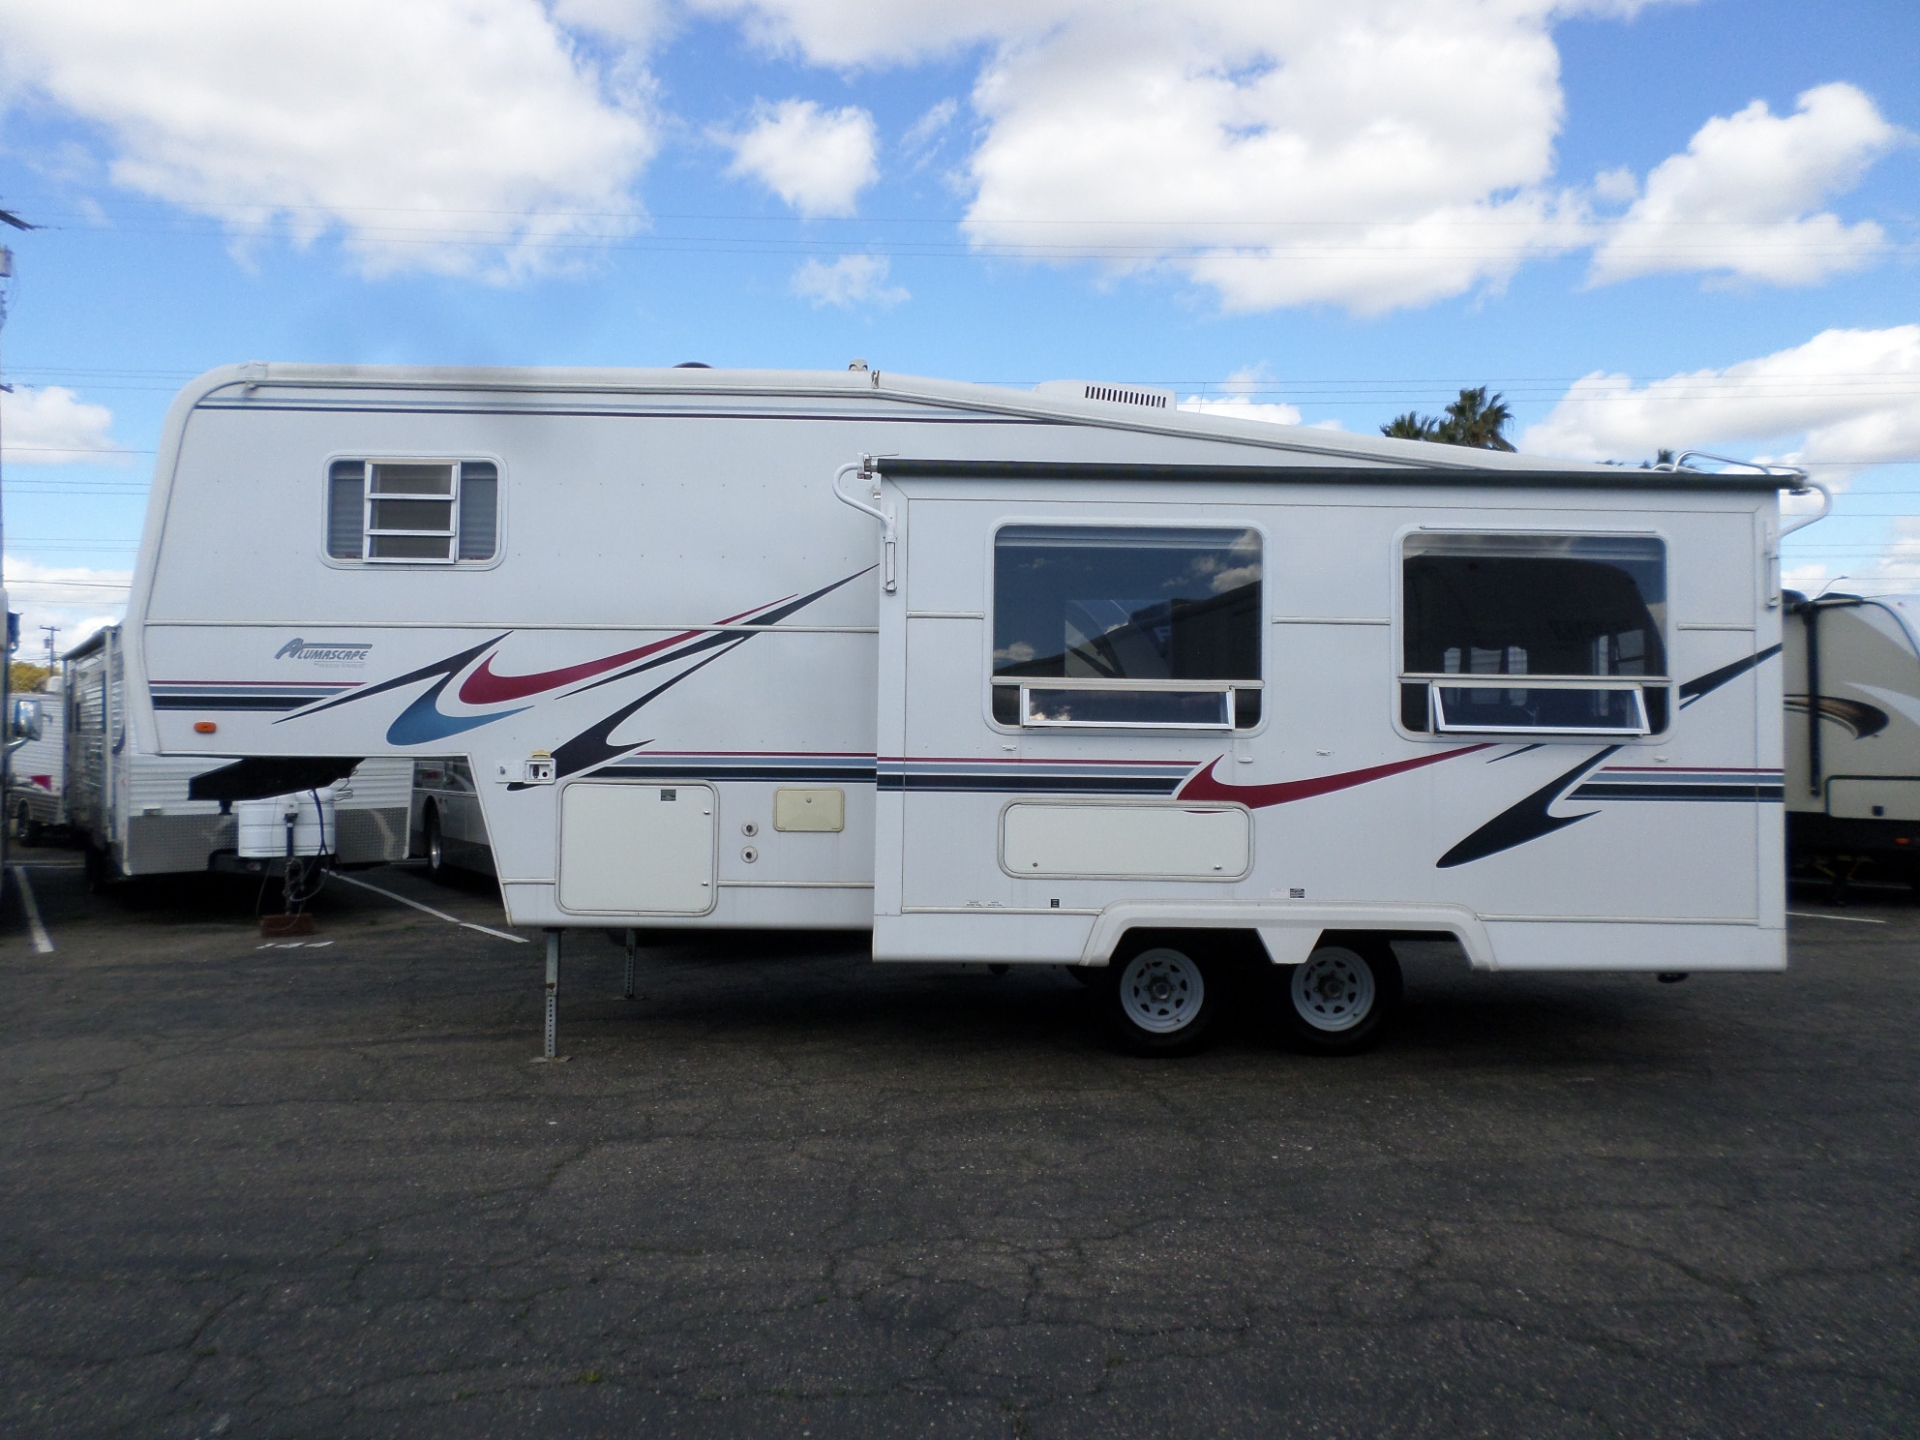 Kelley Blue Book For Rvs | Top Car Release 2020 Kelley Blue Book For Fifth Wheel Trailers